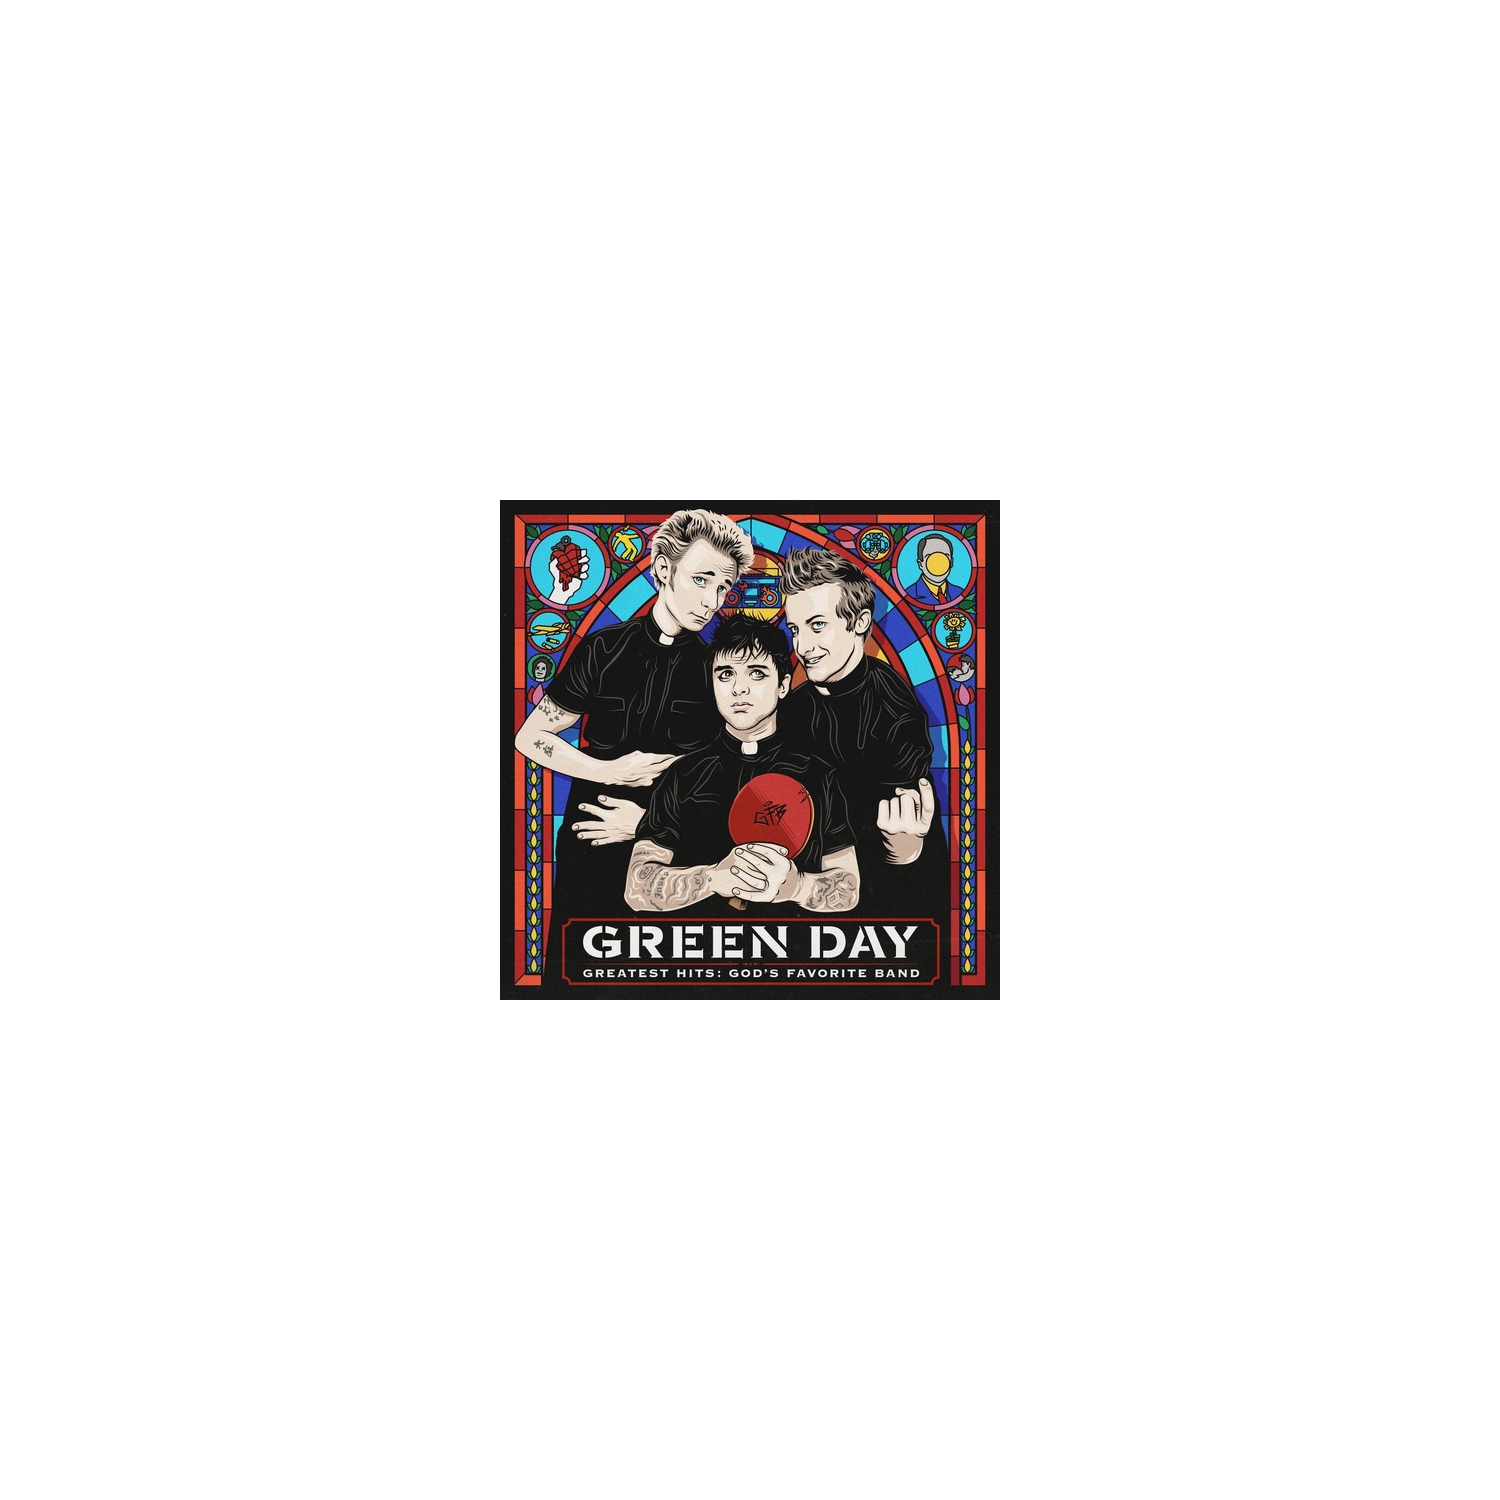 GREATEST HITS: GOD'S FAVORITE BAND - GREEN DAY [2LP]